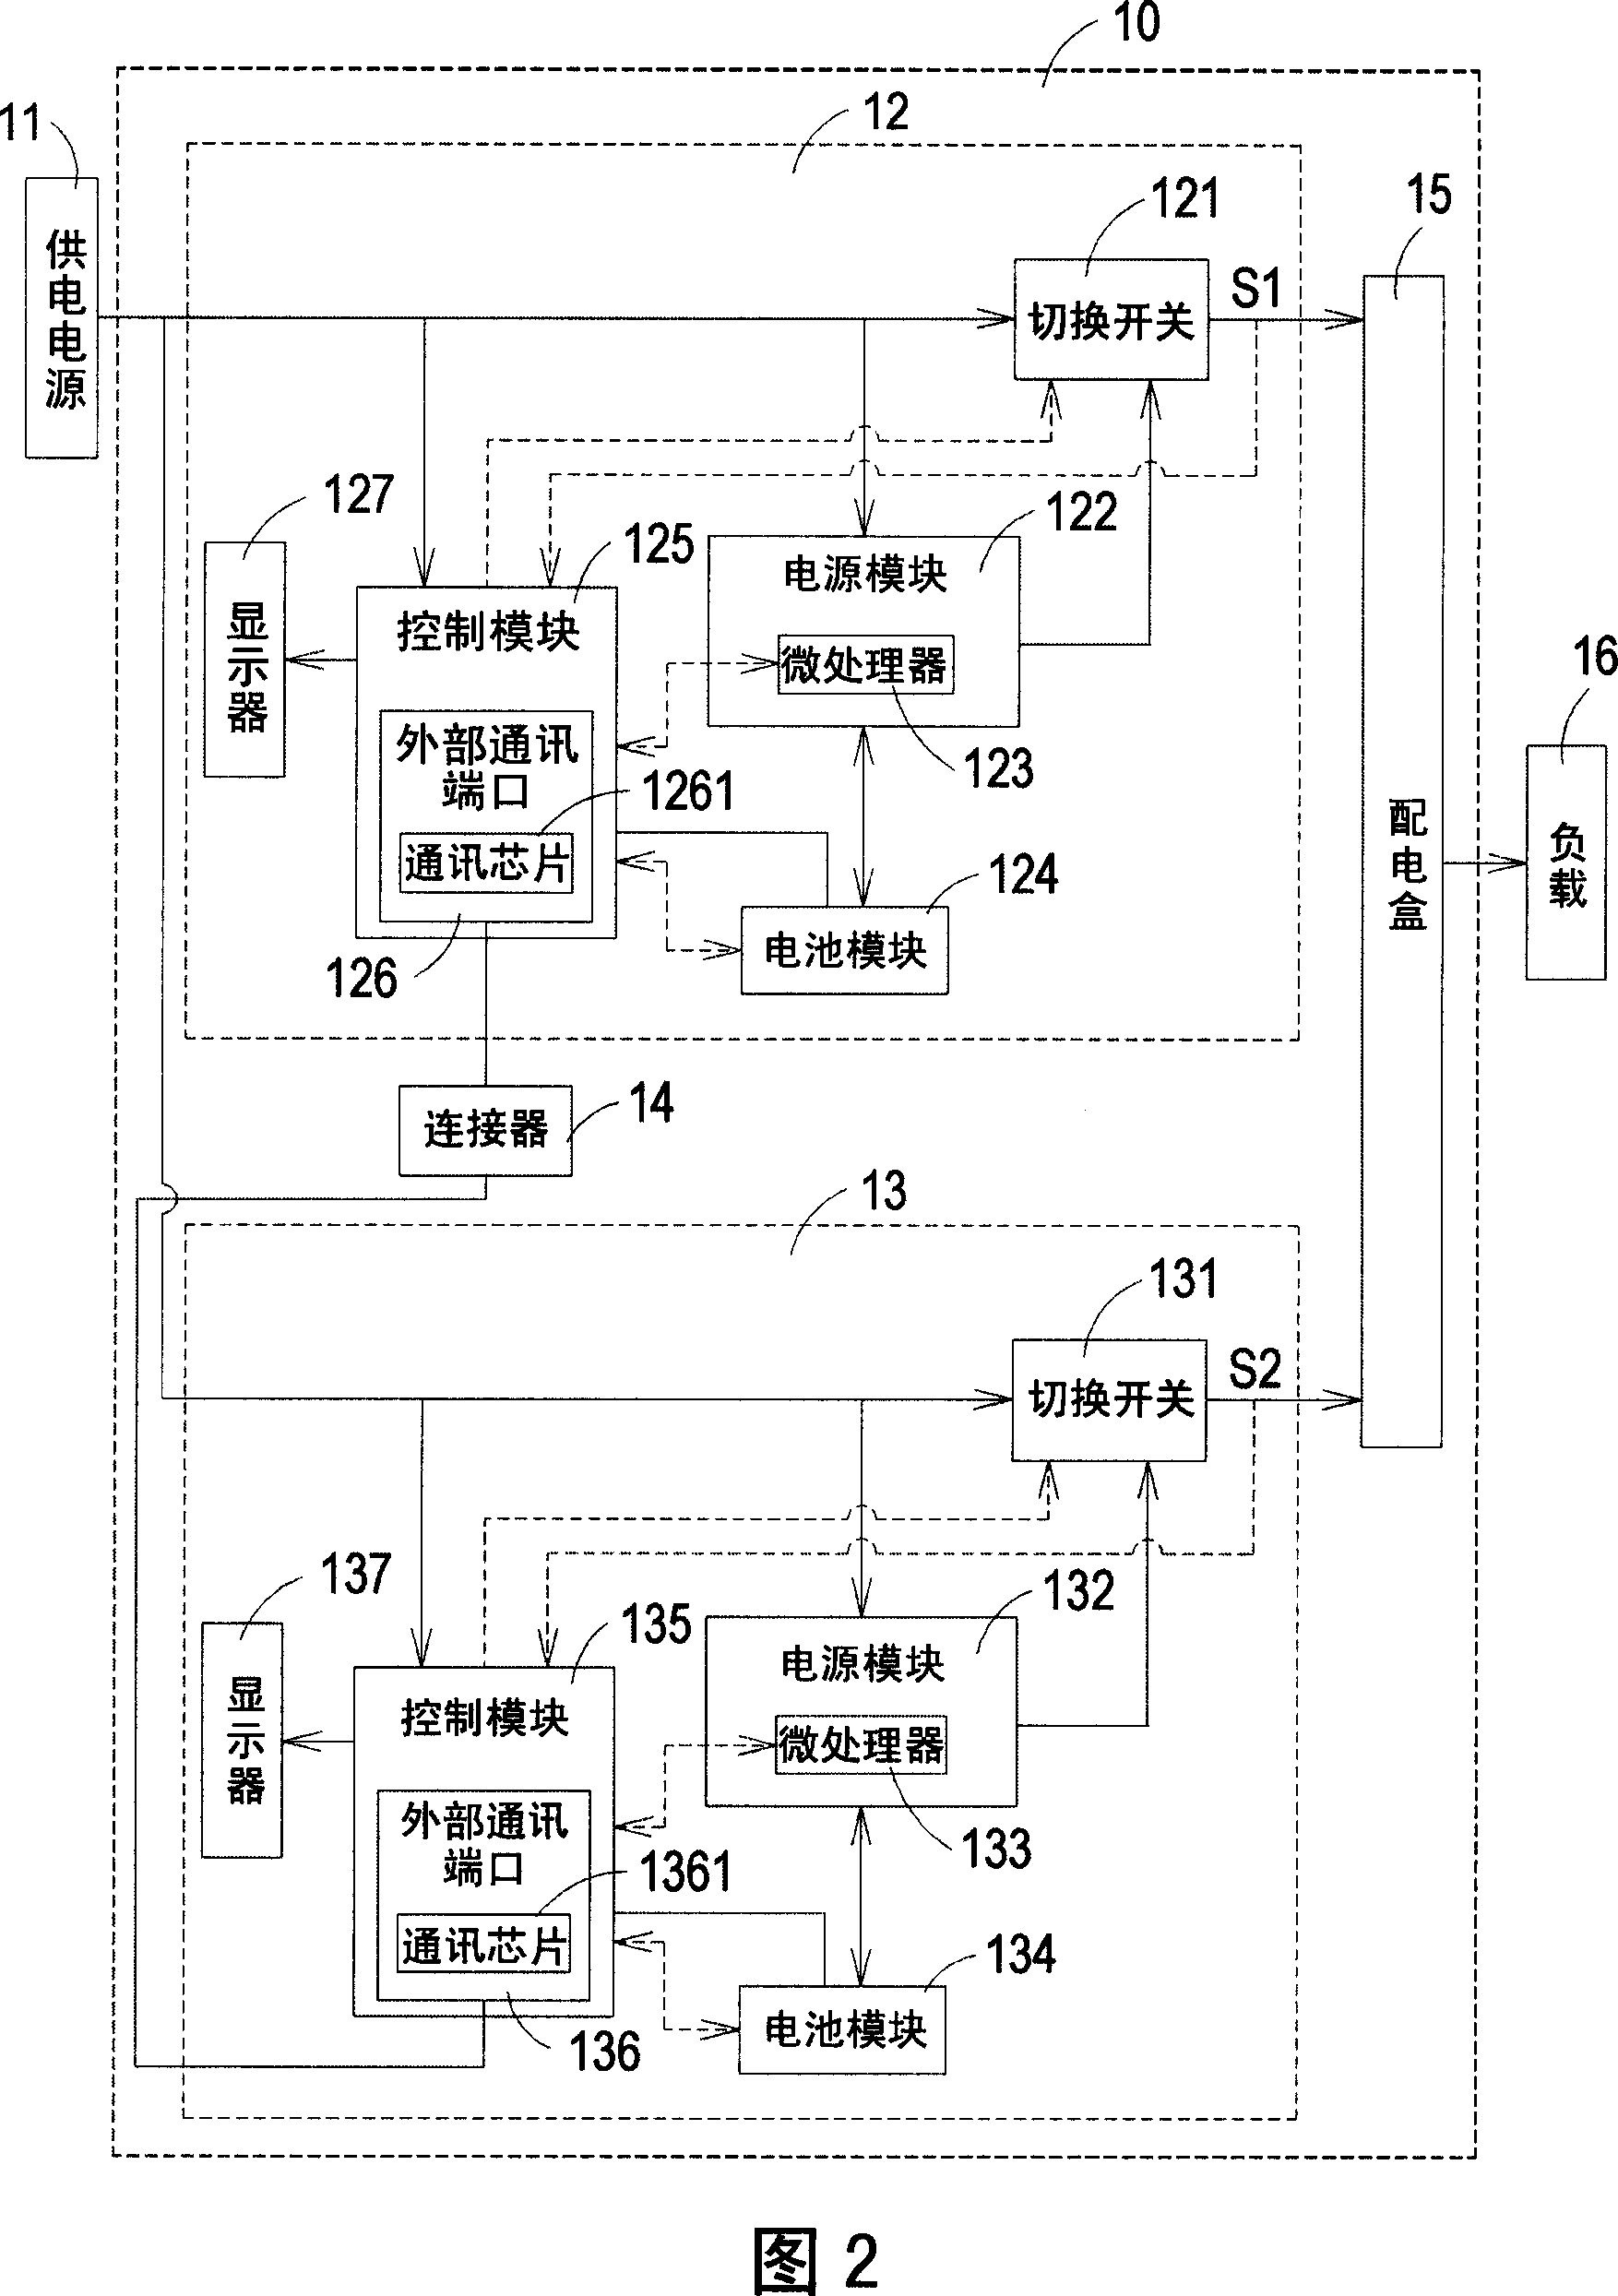 Parallel uninterrupted power supply system